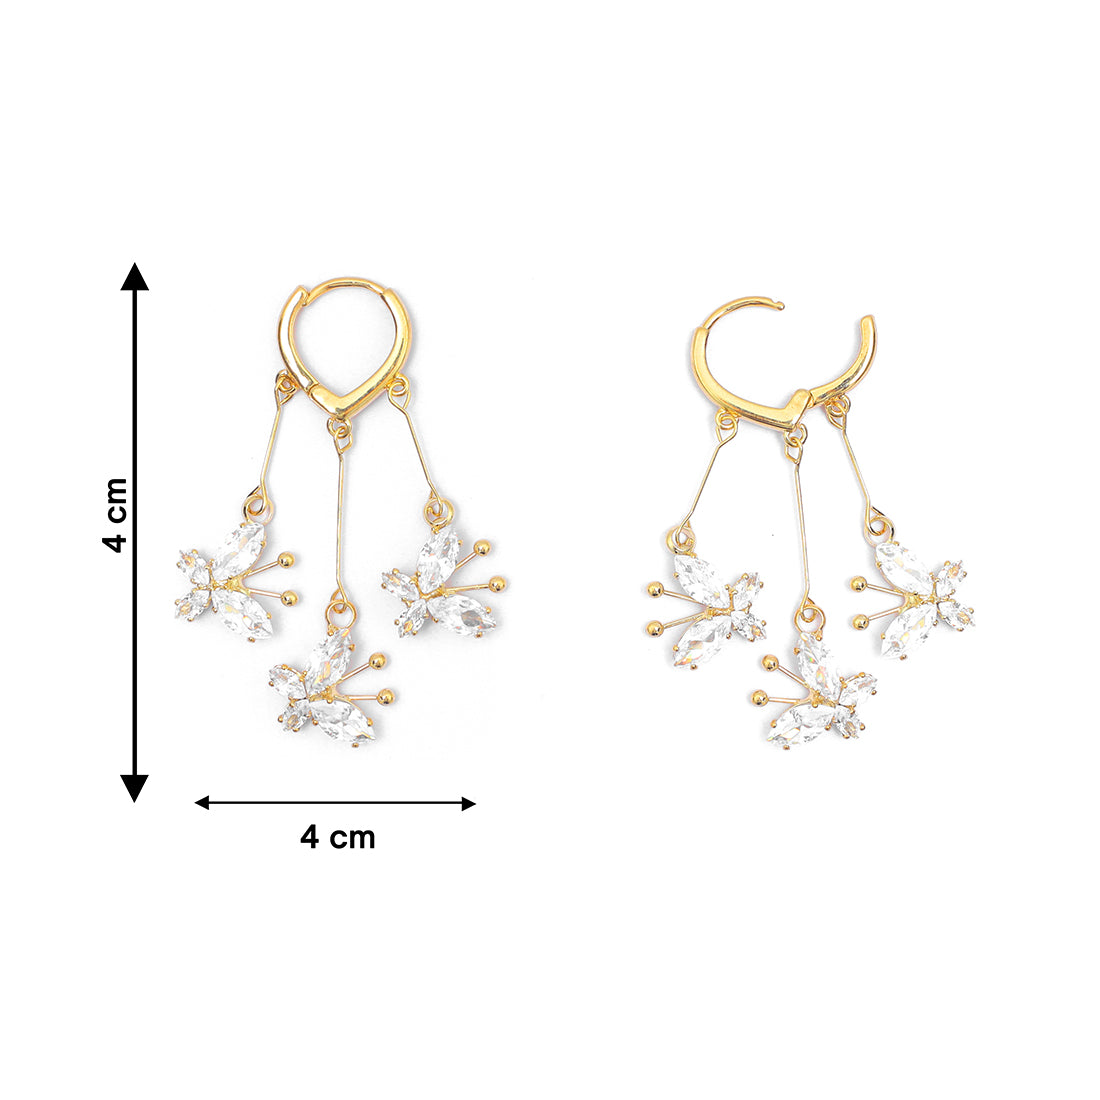 Chic Gold-Toned Butterfly Hoop Earrings With Diamante